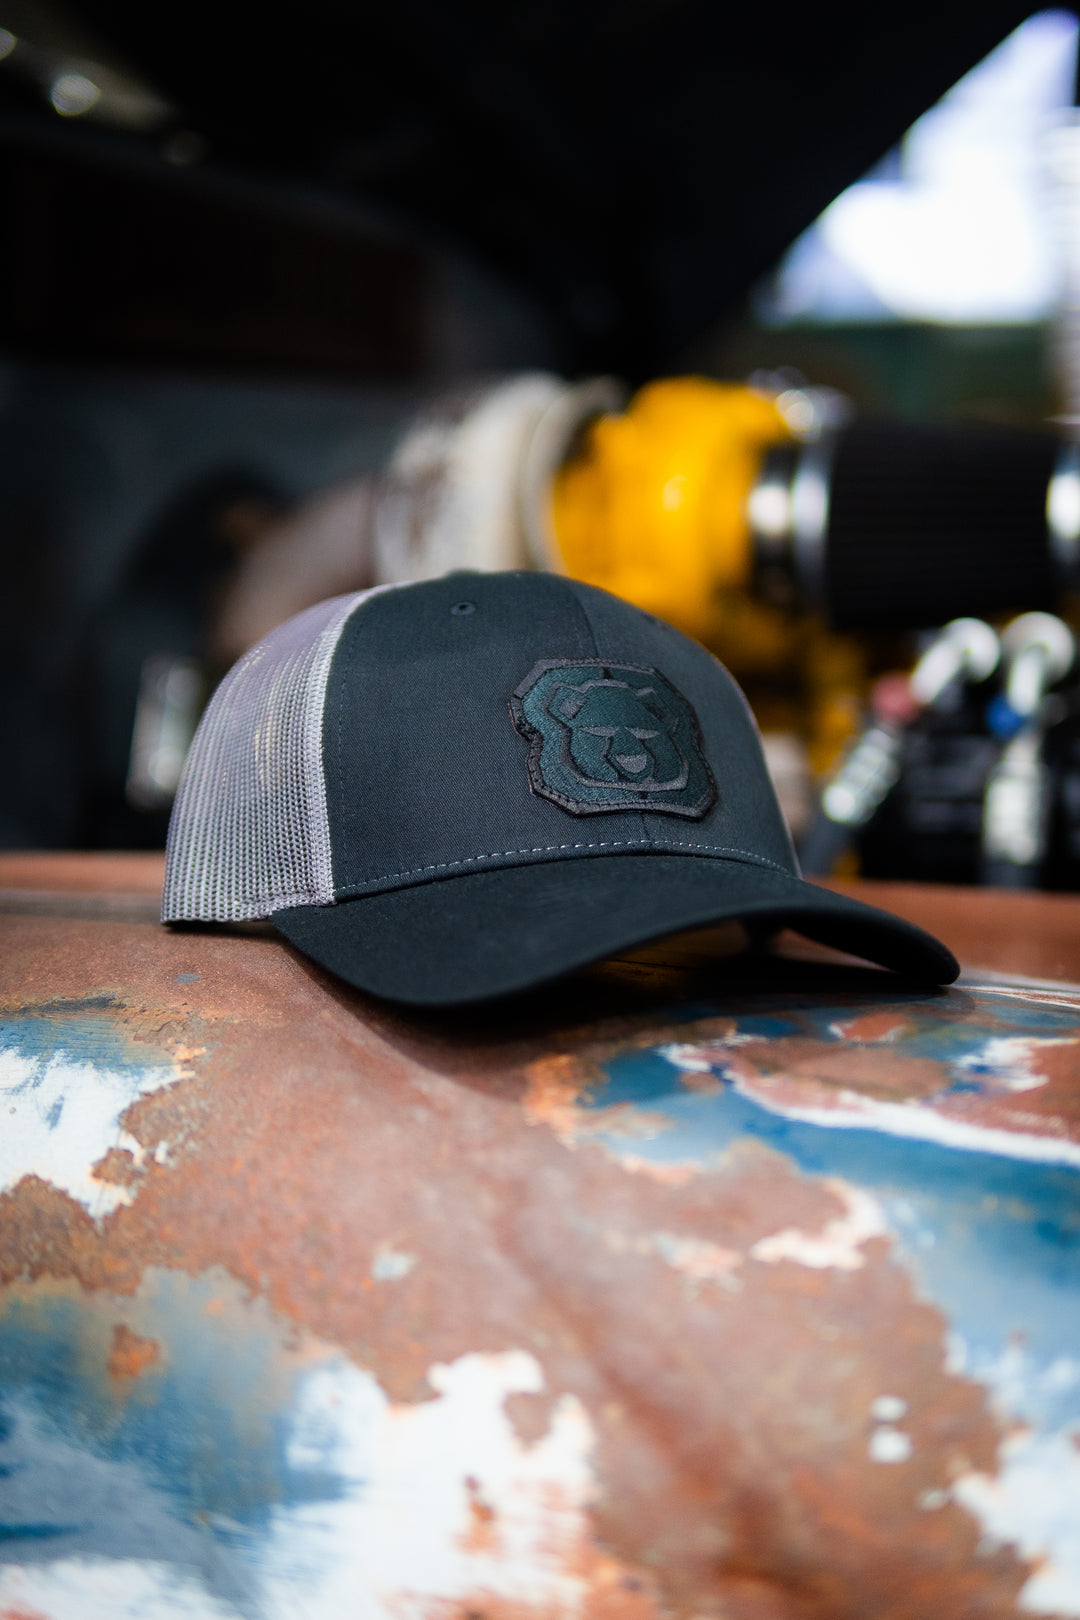 Bear Brothers ICON Black Patch Hat - Black/Charcoal